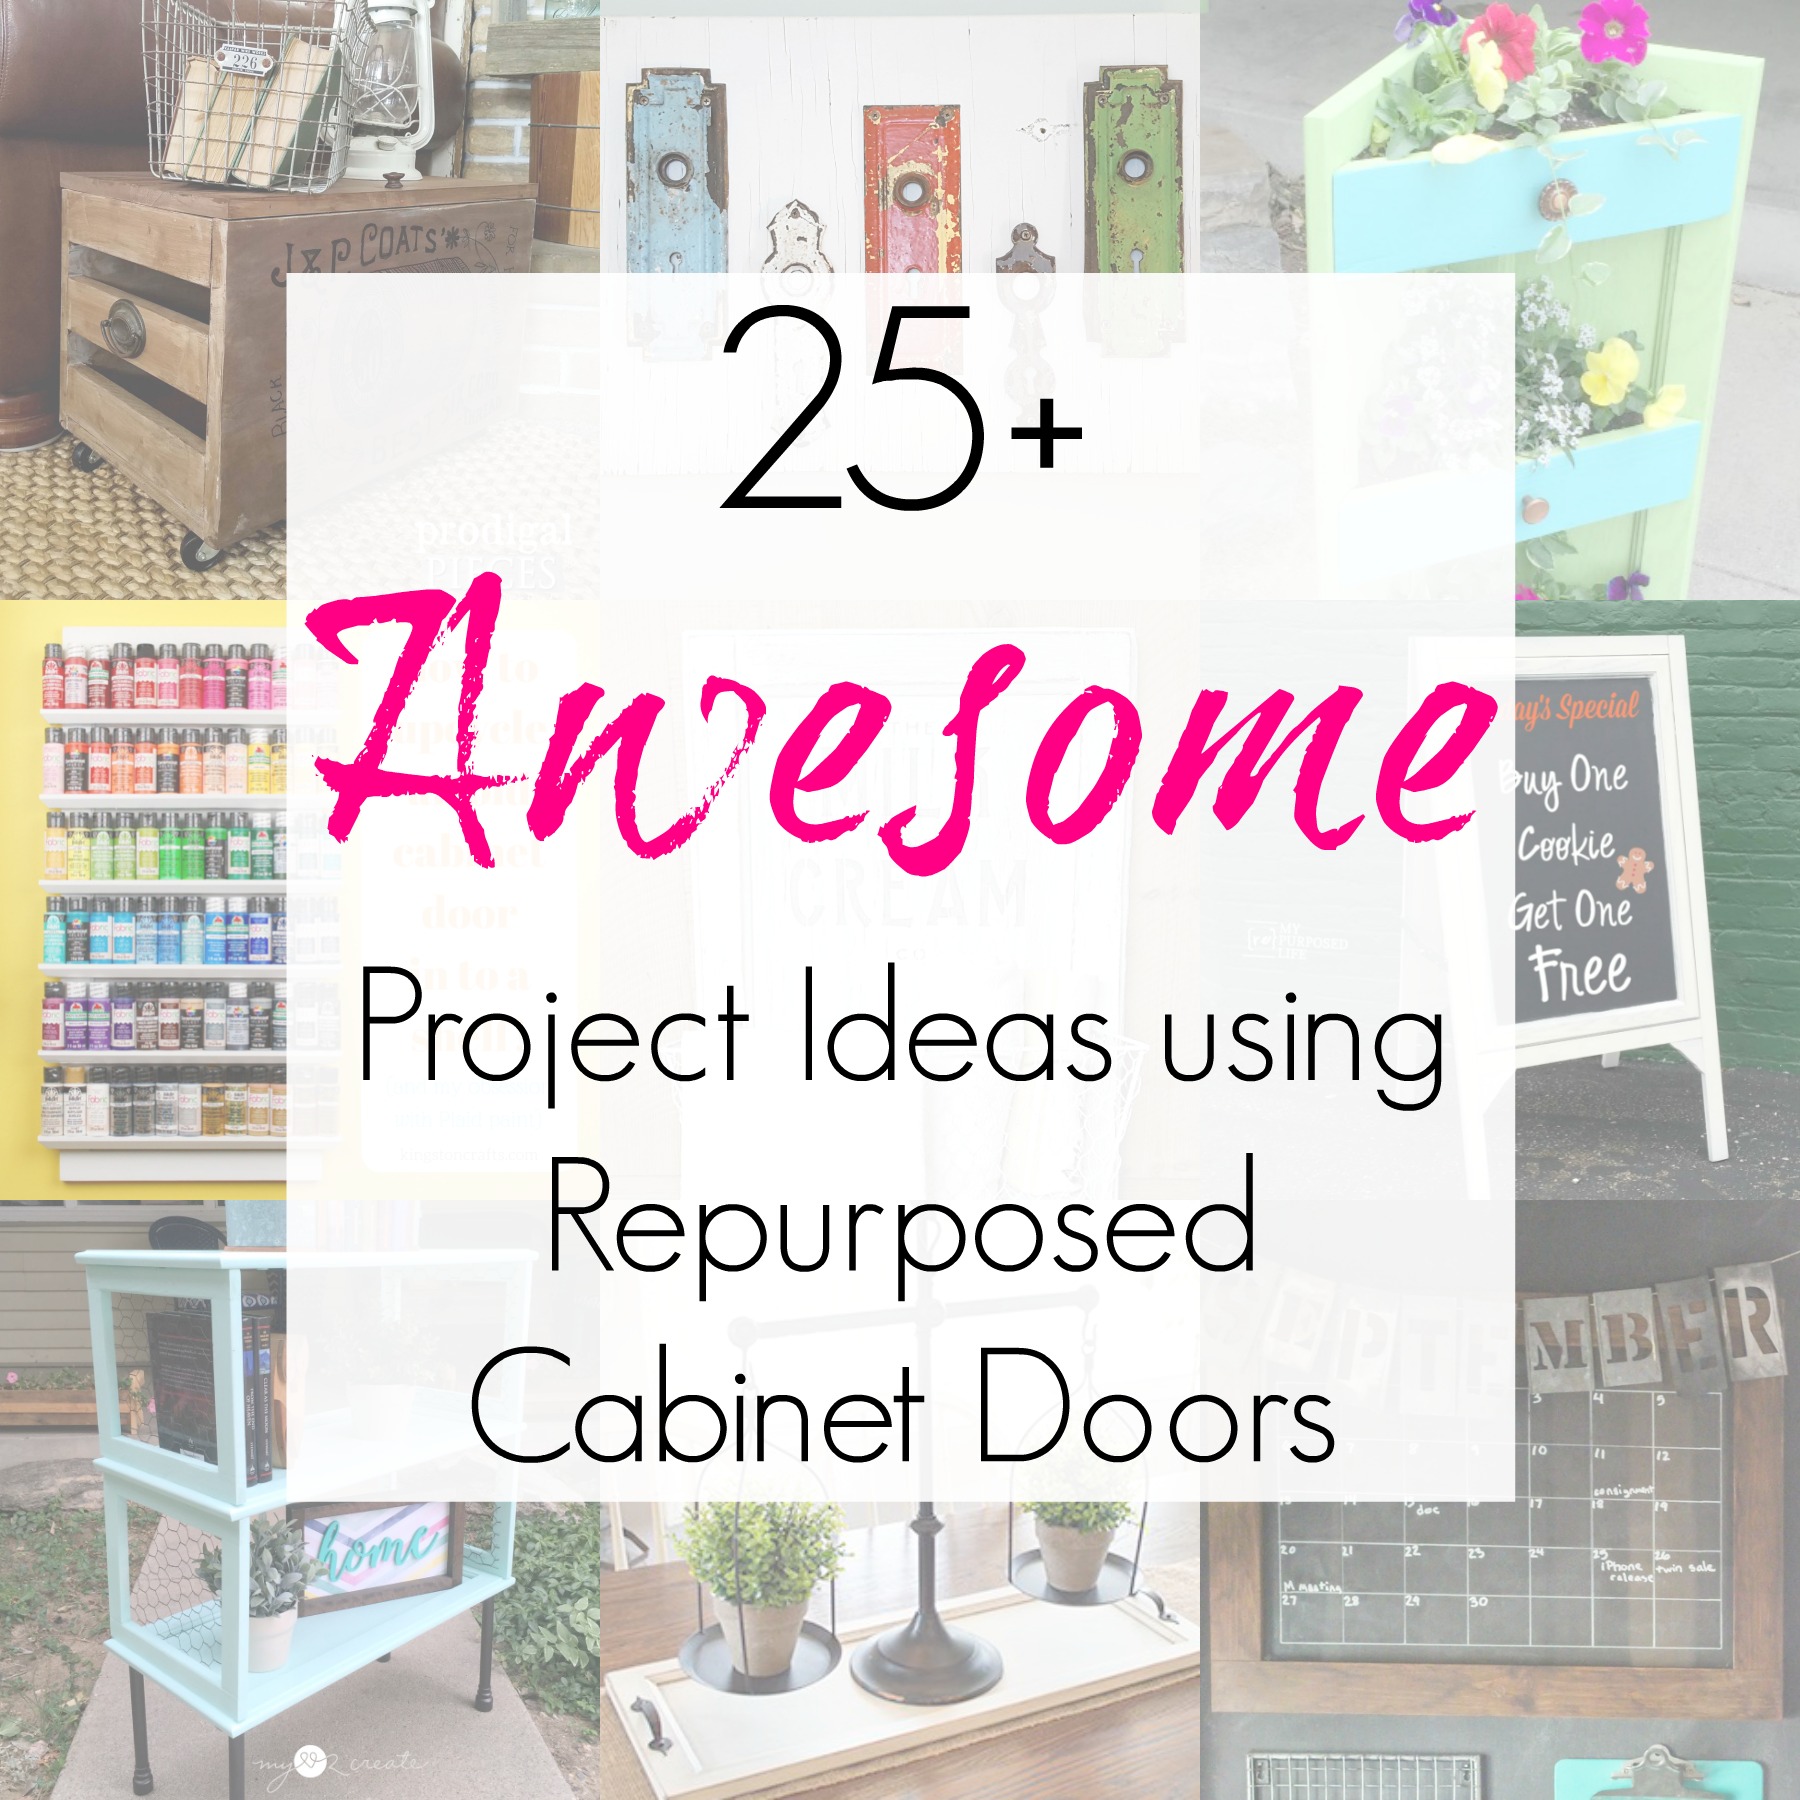 Upcycling ideas and repurposed projects for cabinet doors, cupboard doors, or architectural salvage as compiled by Sadie Seasongoods